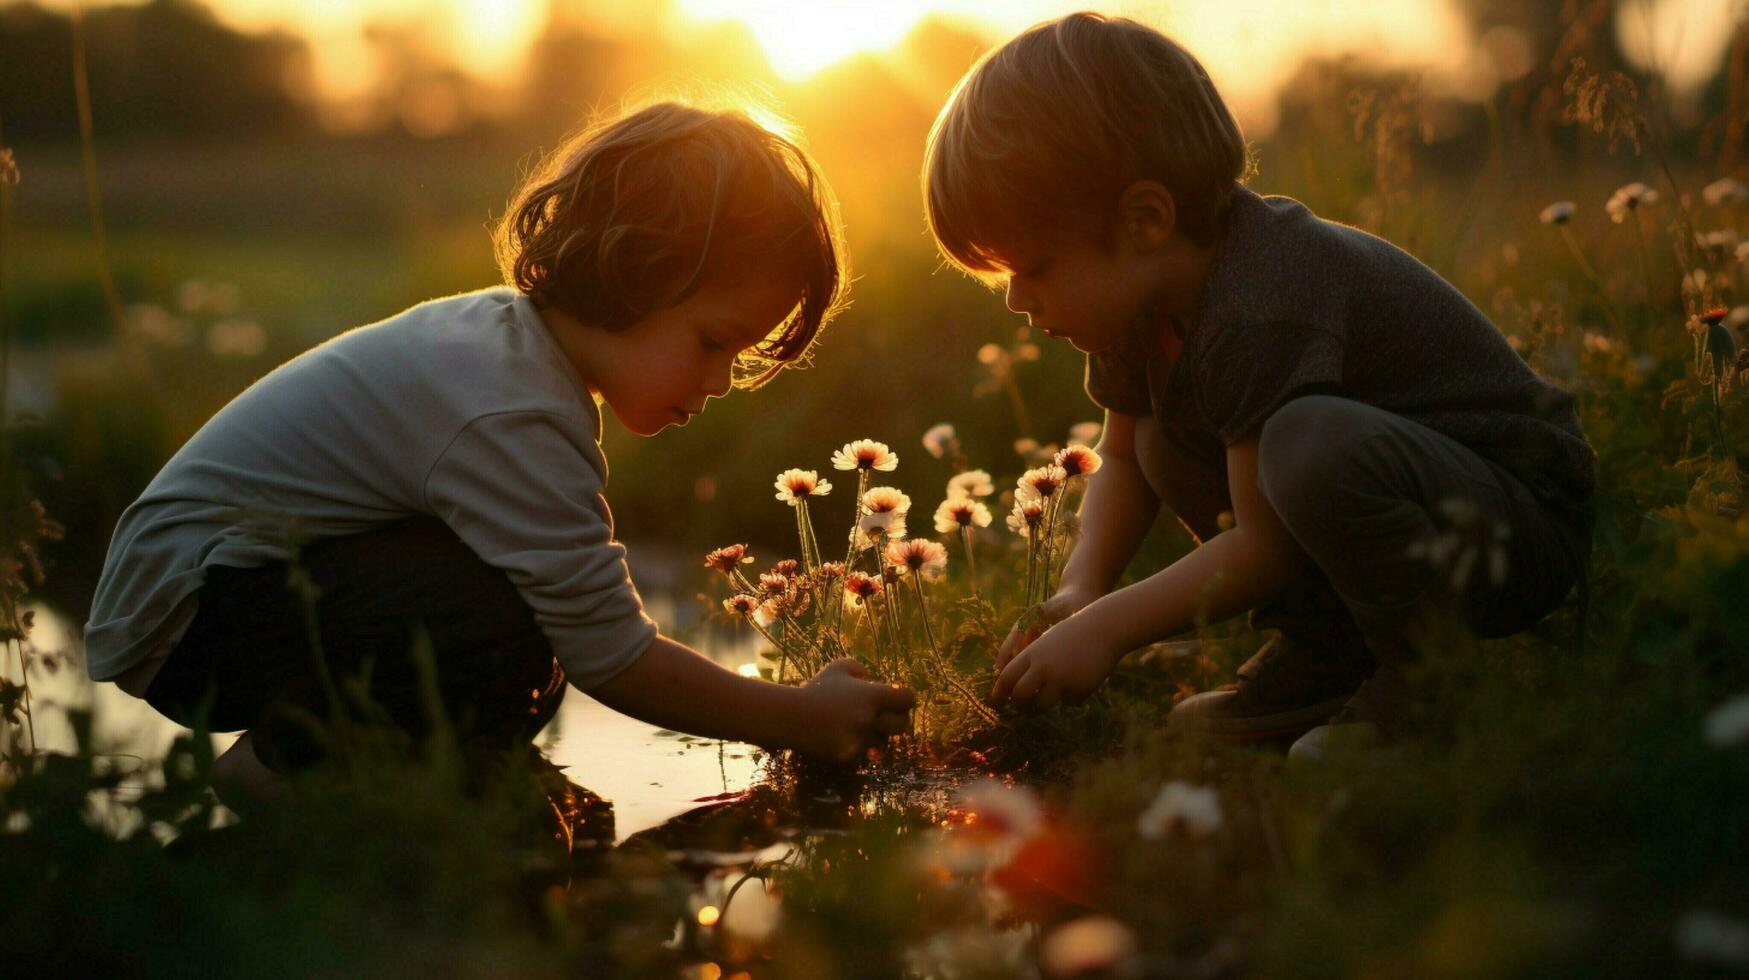 cute boys playing in nature at sunset photo